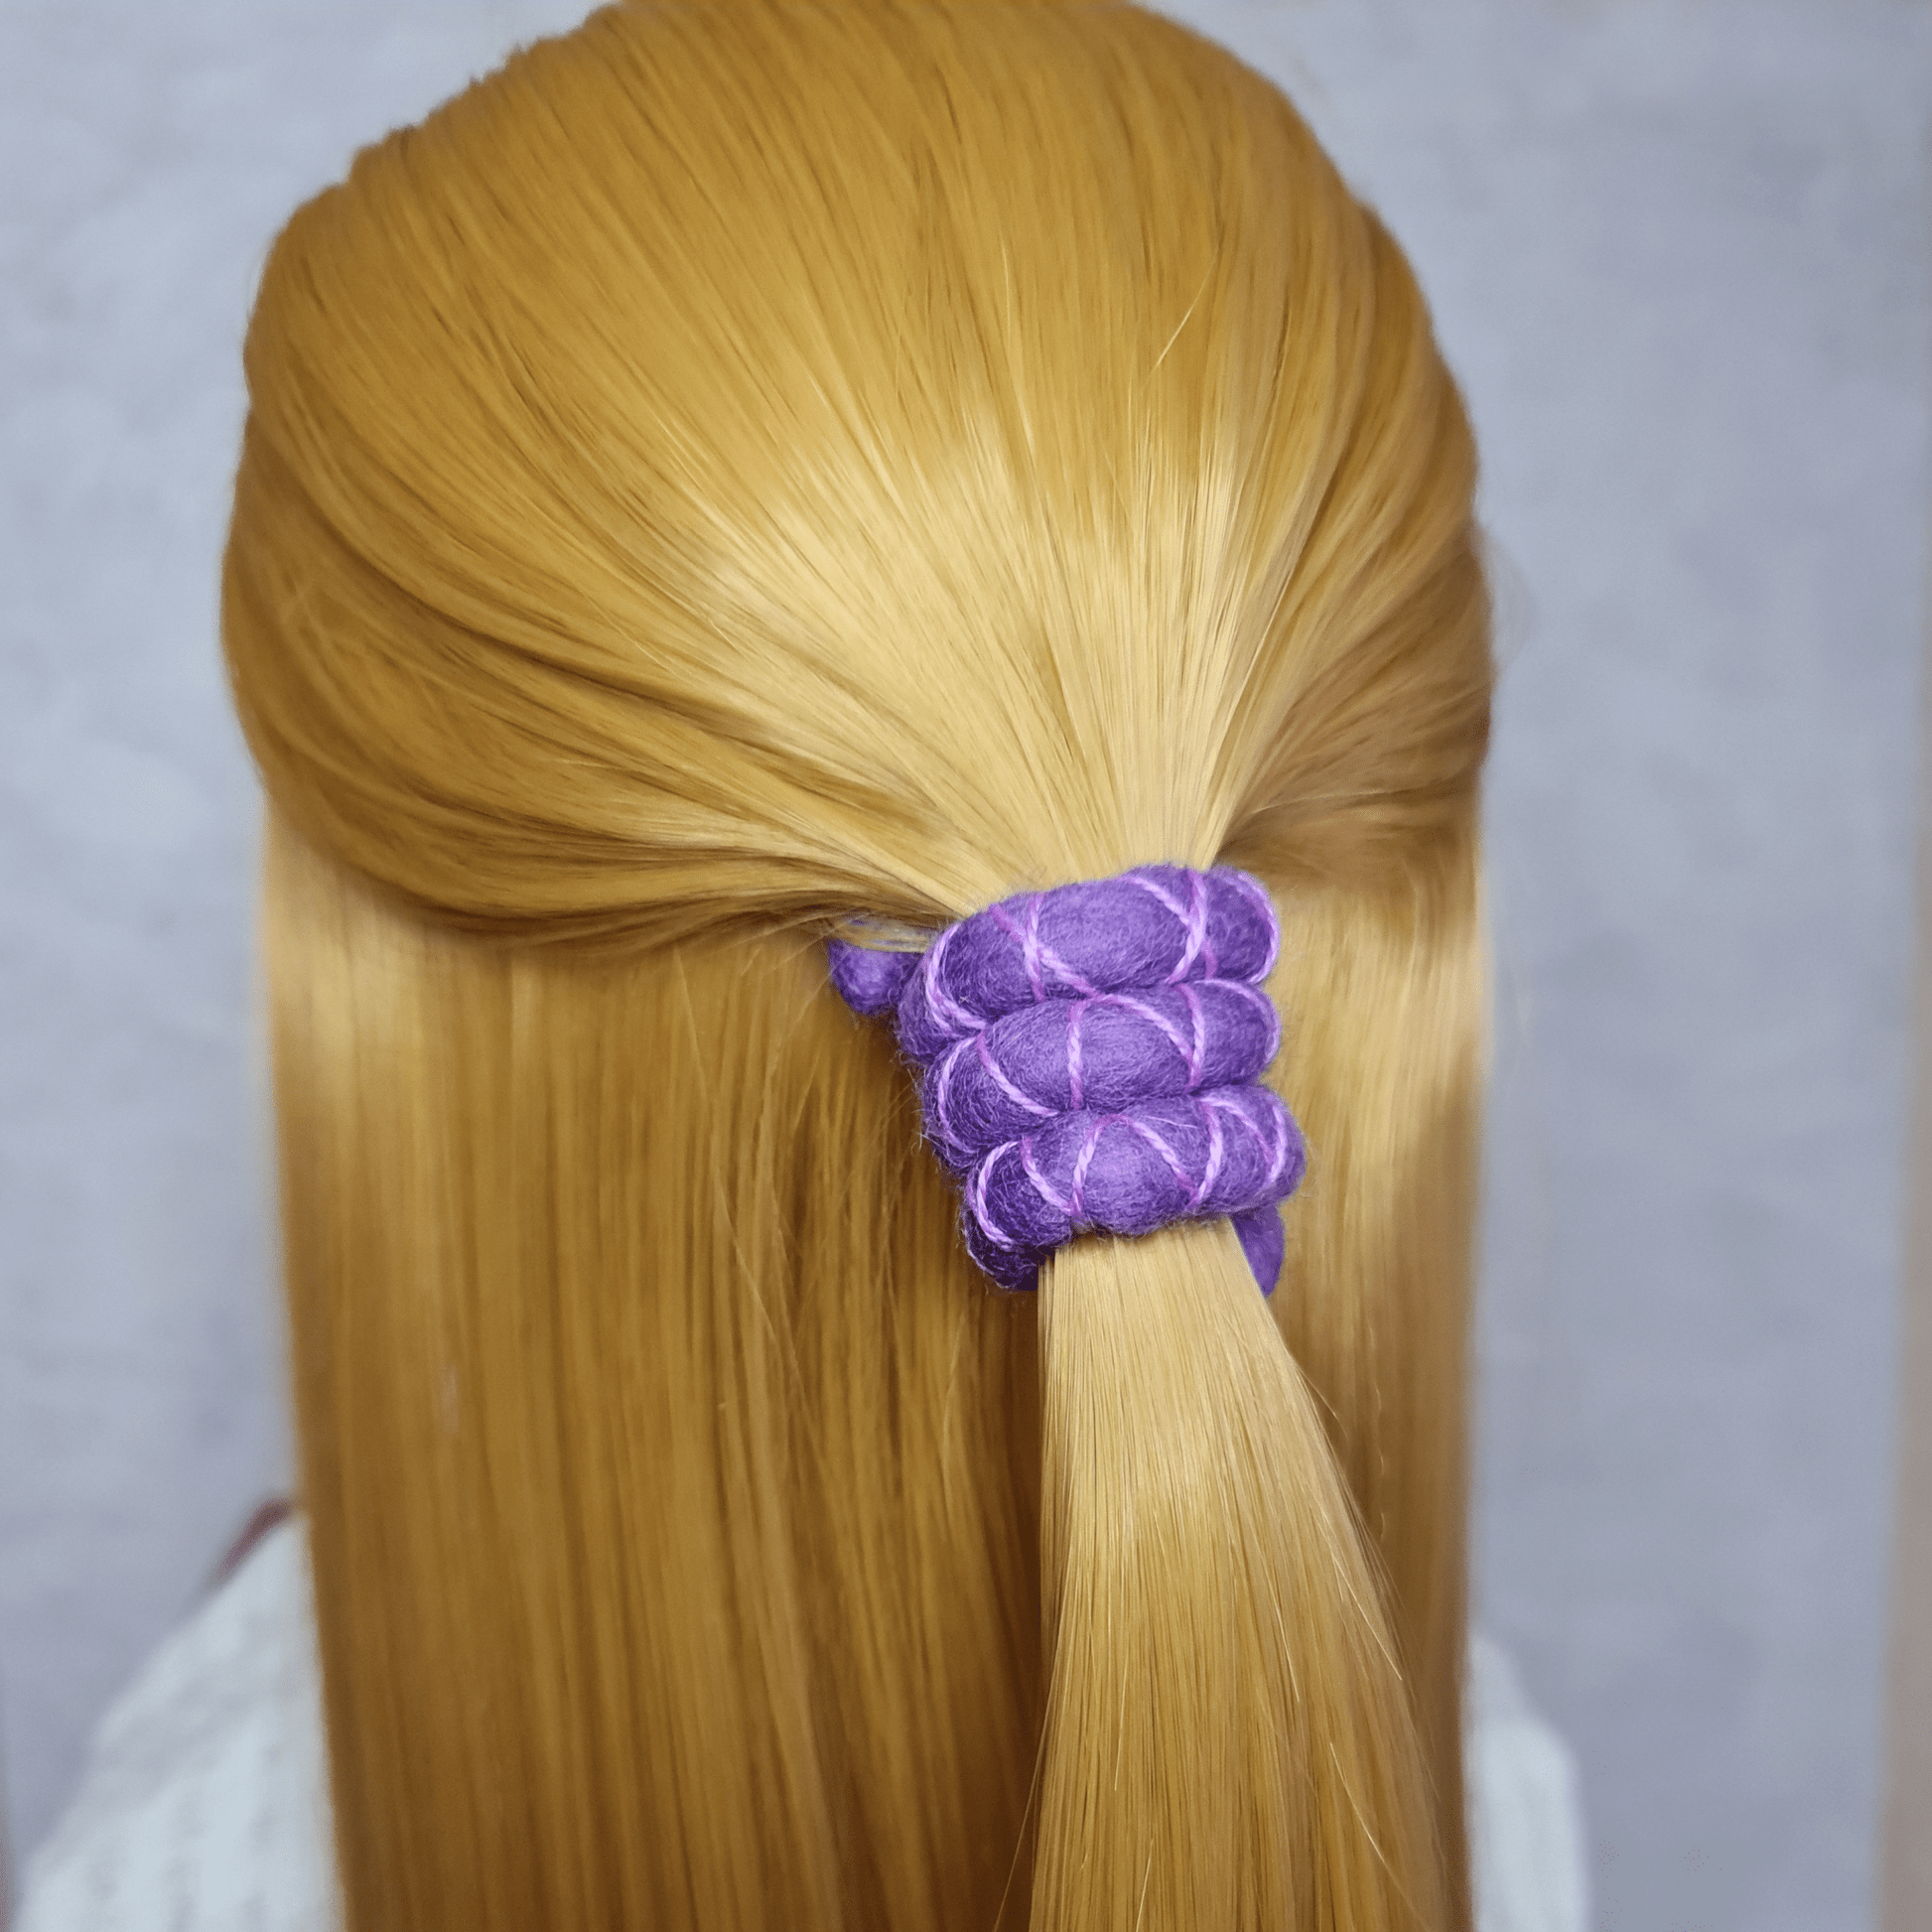 Bendable tie for dreadlocks (spiralock) purple with lavender - Hairful Things